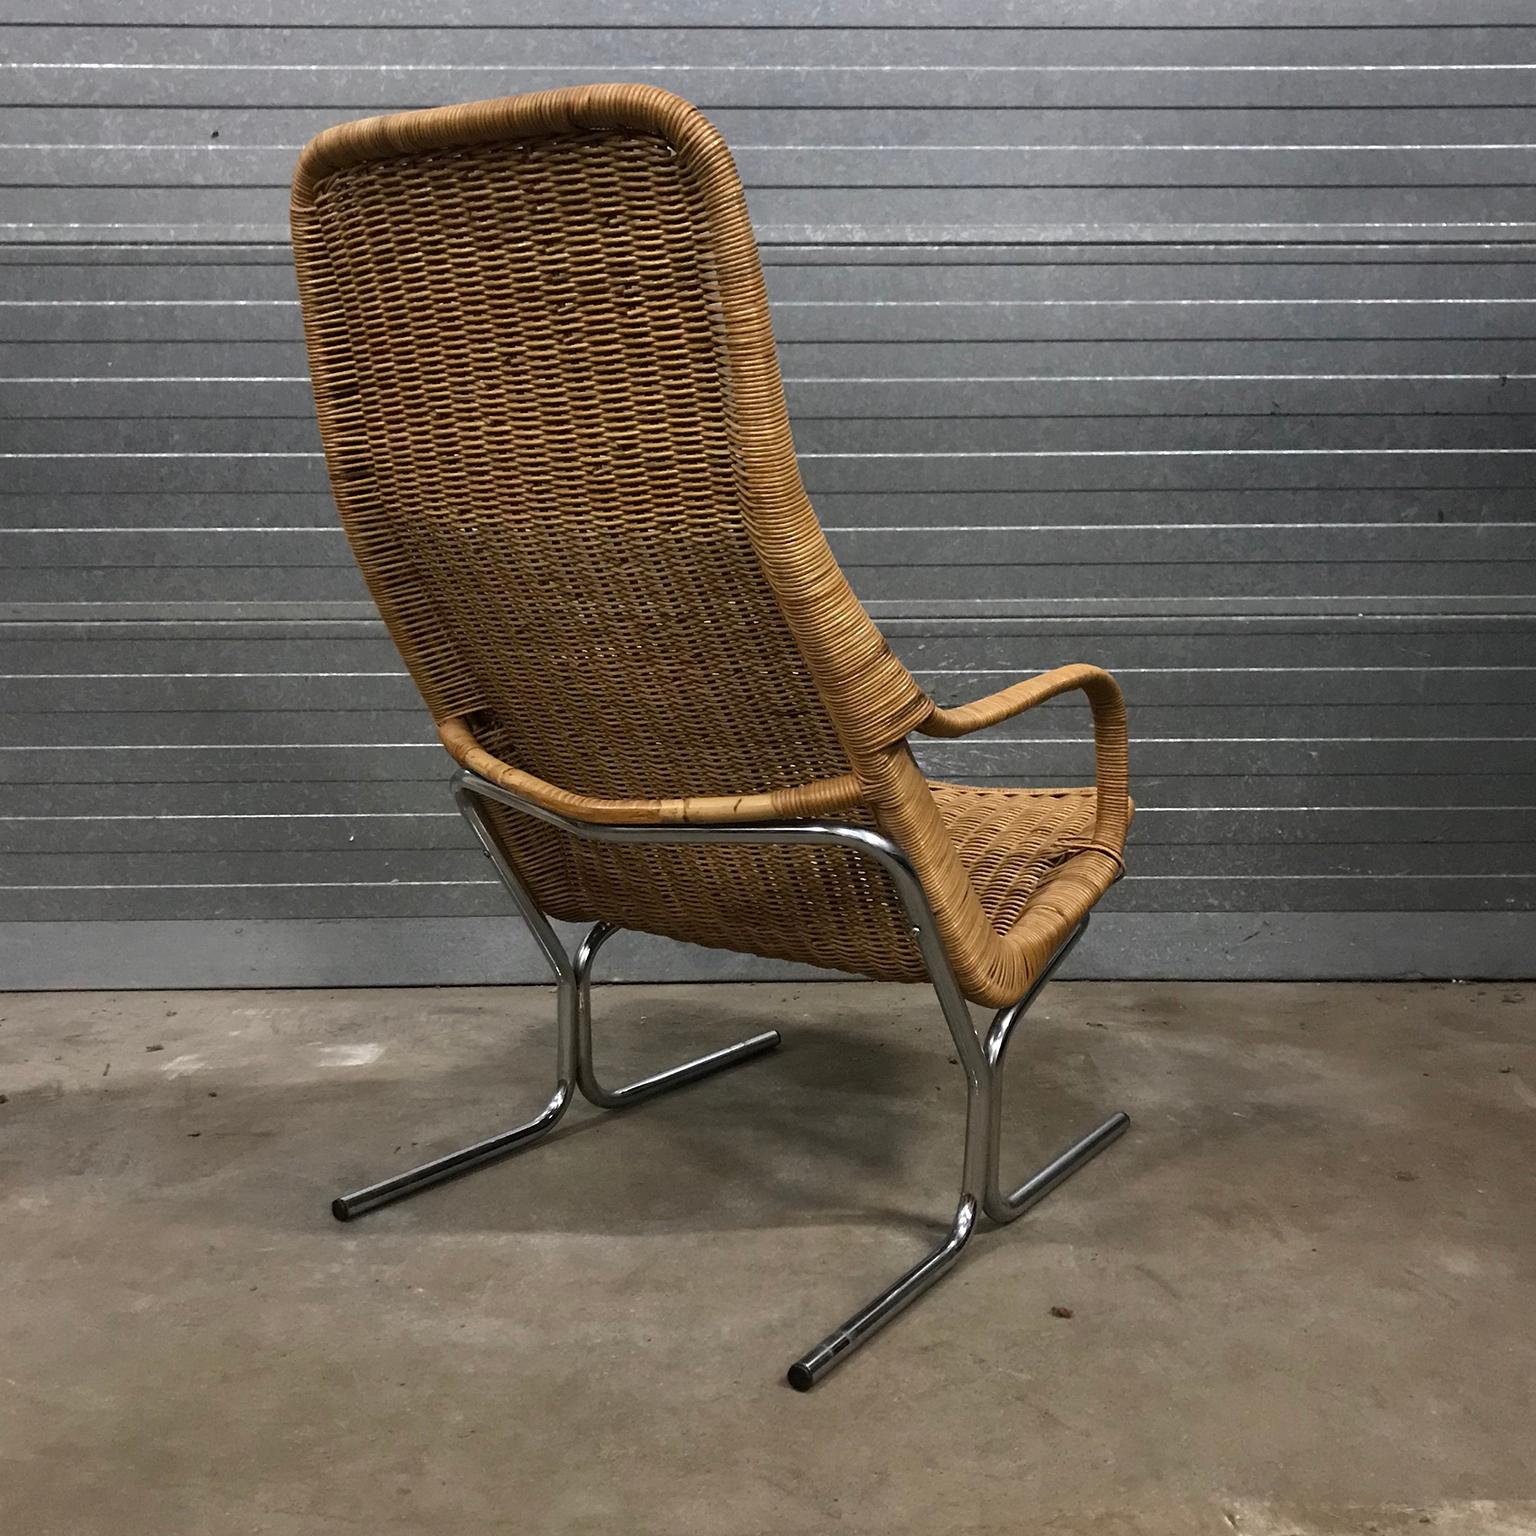 1961 Dirk Van Sliedregt, Rare 514 Original Wicker Lounge Chair with Chrome Base In Good Condition For Sale In Amsterdam IJMuiden, NL